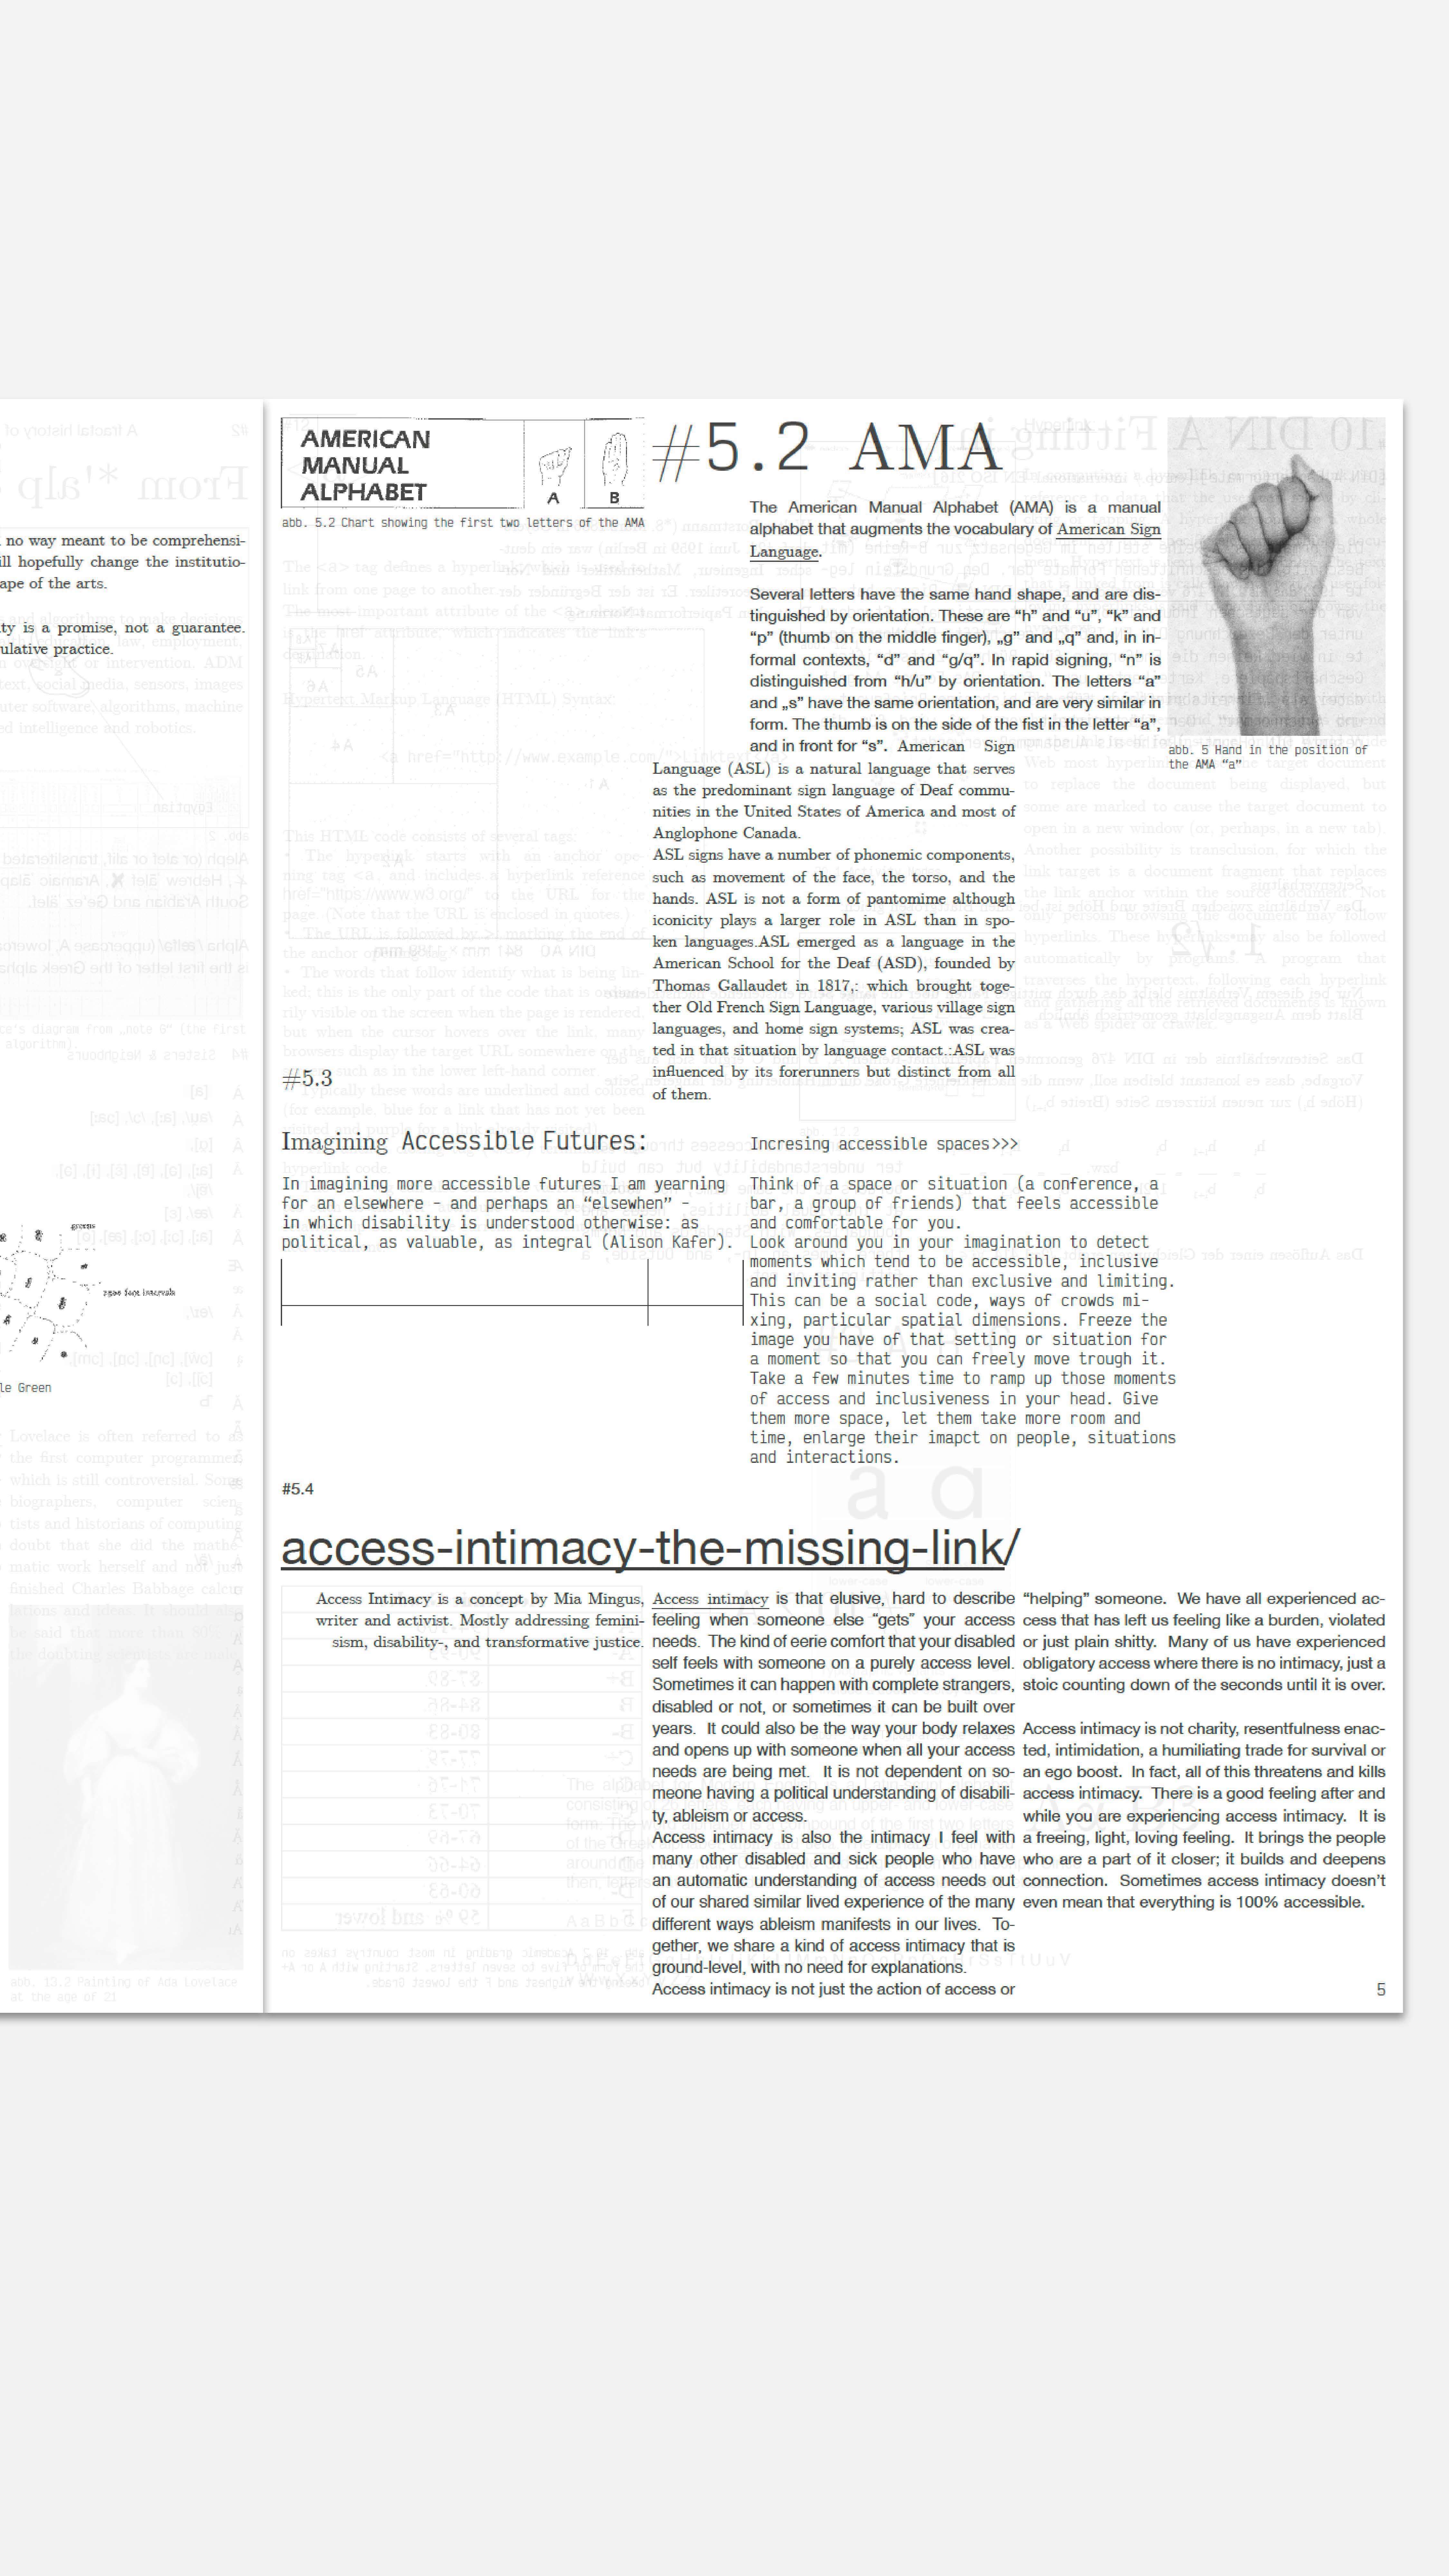 An open publication, one and a half pages visible, black letters on white copy paper and black and white bitmapped images.